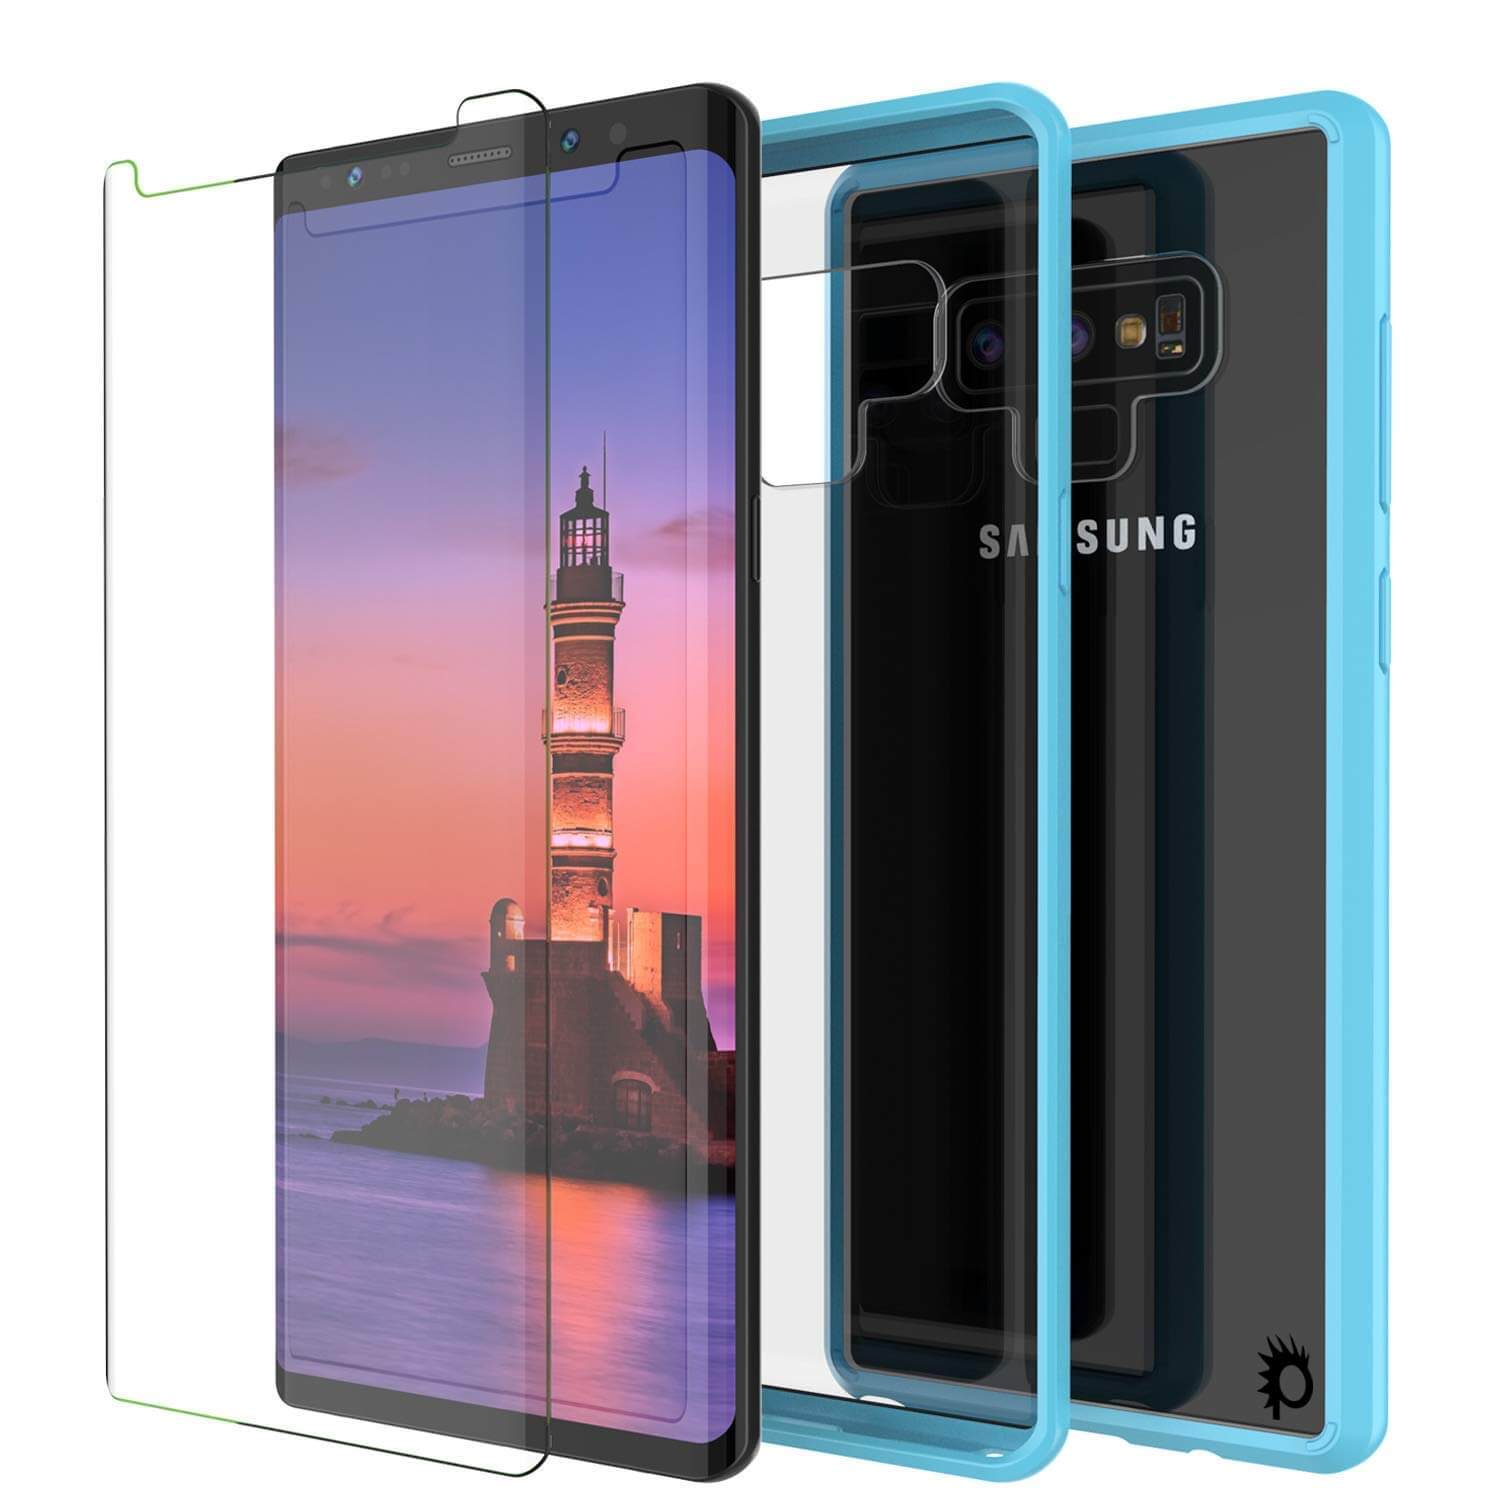 Galaxy Note 9 Case, PUNKcase [LUCID 2.0 Series] [Slim Fit] Armor Cover W/Integrated Anti-Shock System [Light Blue] - PunkCase NZ